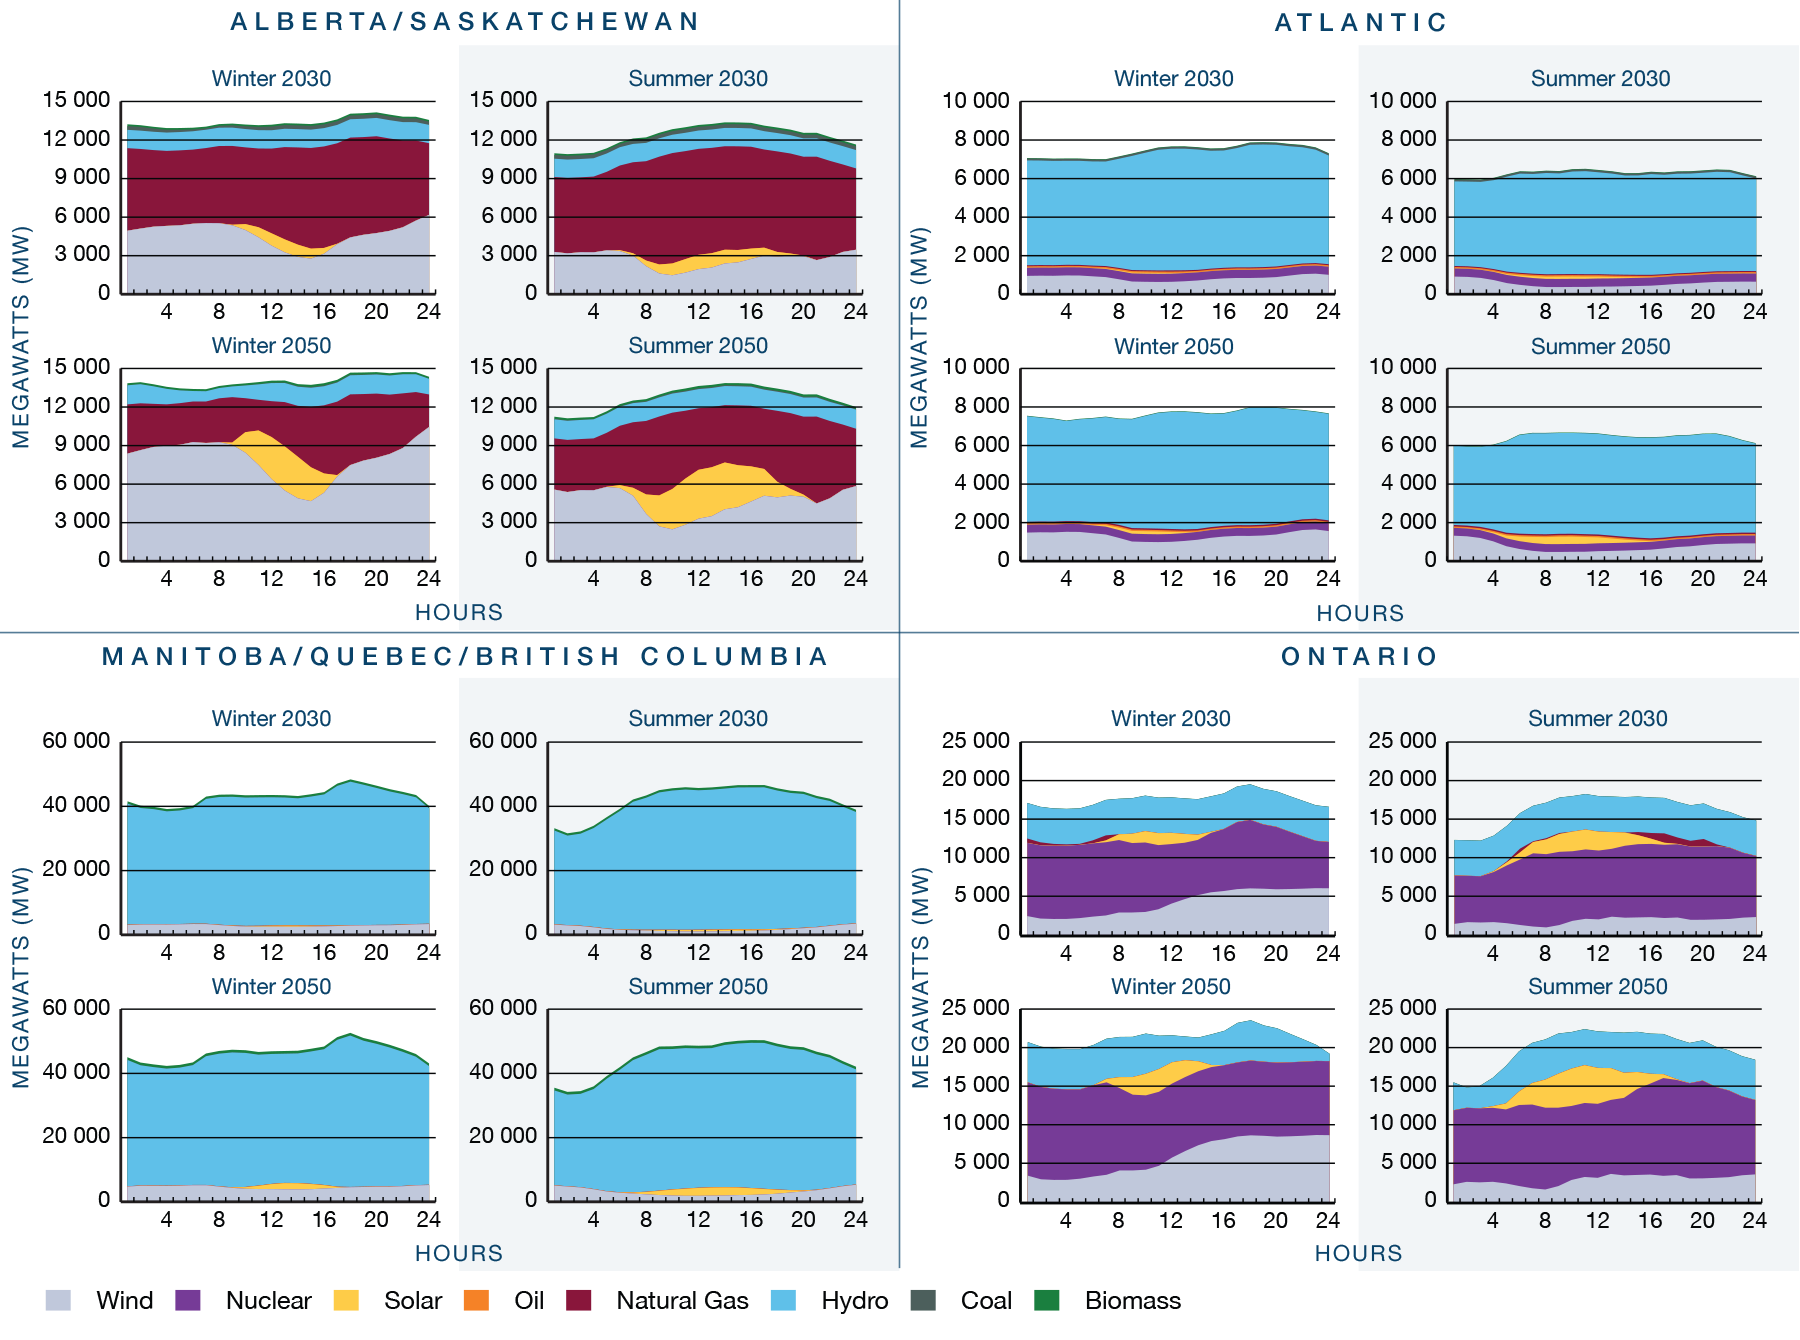 Figure 22 Simulated Hourly Electricity Profiles, 2030 and 2050